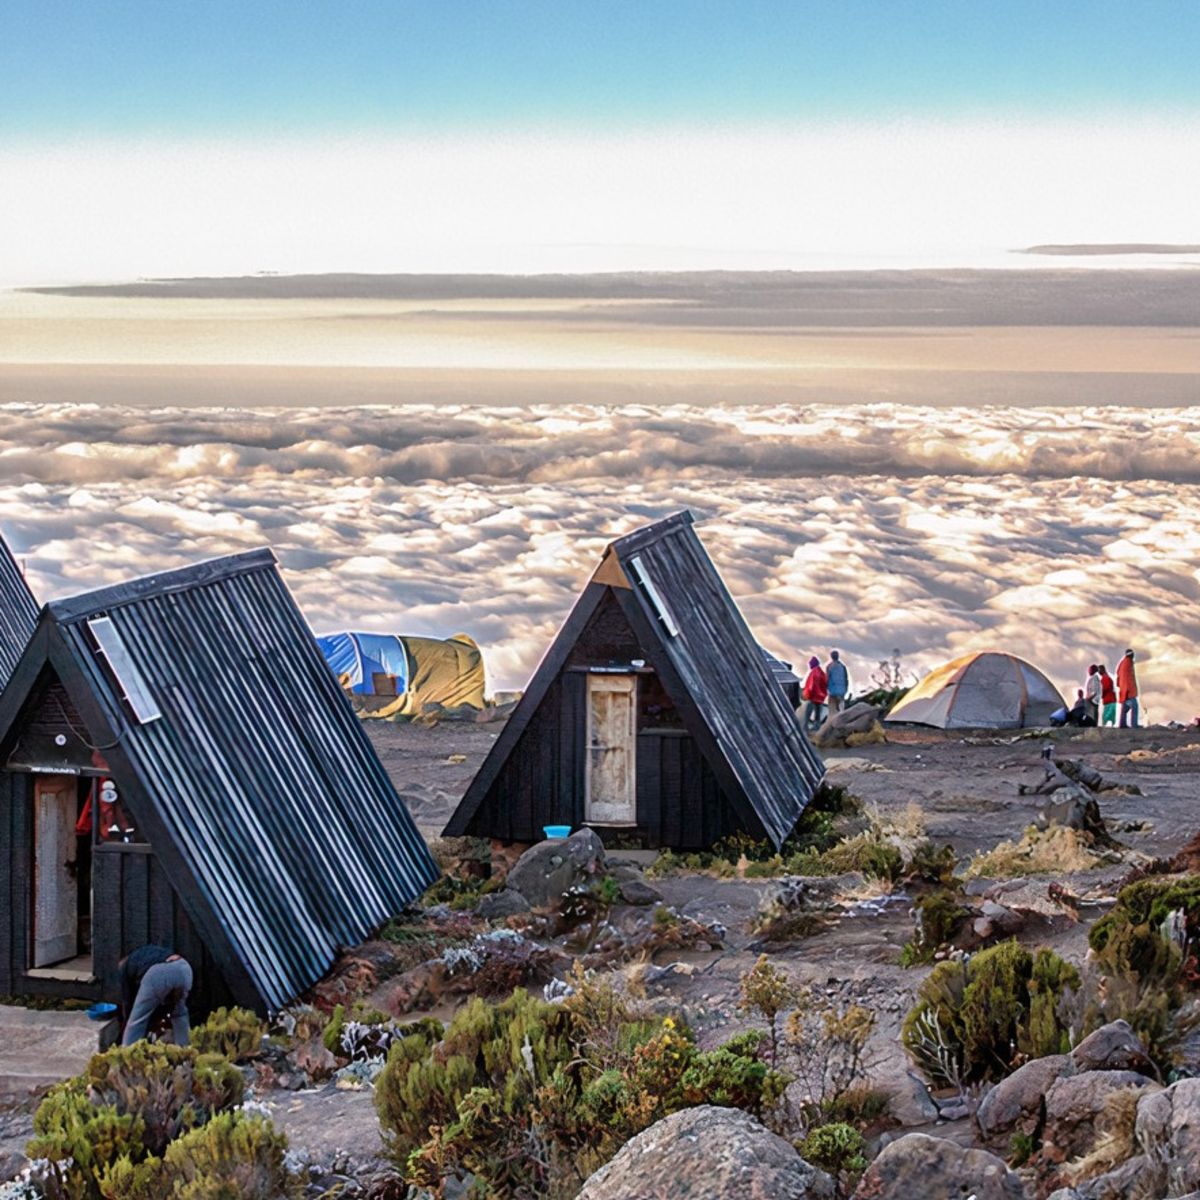 A-frame huts at MArangu route campsite with blanket of cloud below